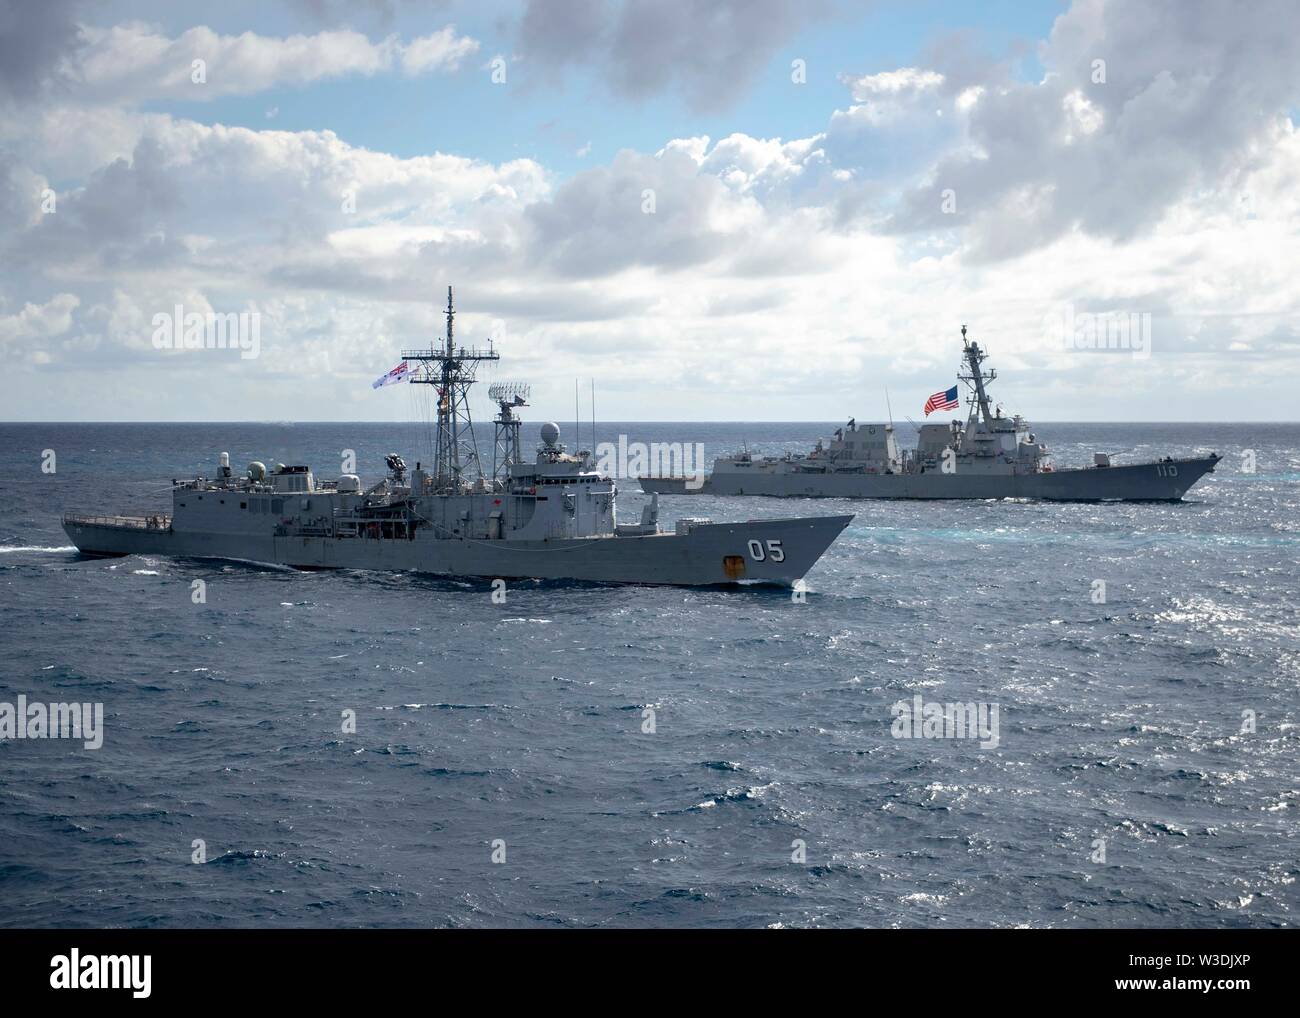 190711-N-WK982-3065 CORAL SEA (July 11, 2019) The Royal Australian Navy Adelaide-class guided-missile frigate HMAS Melbourne (FFG 05), left, and the Arleigh Burke-class guided-missile destroyer USS William P. Lawrence (DDG 110) maneuver into formation during Talisman Sabre 2019. Talisman Sabre 2019 illustrates the closeness of the Australian and U.S. alliance and the strength of the military-to-military relationship. This is the eighth iteration of this exercise. (U.S. Navy photo by Mass Communication Specialist 2nd Class John Harris/Released) Stock Photo